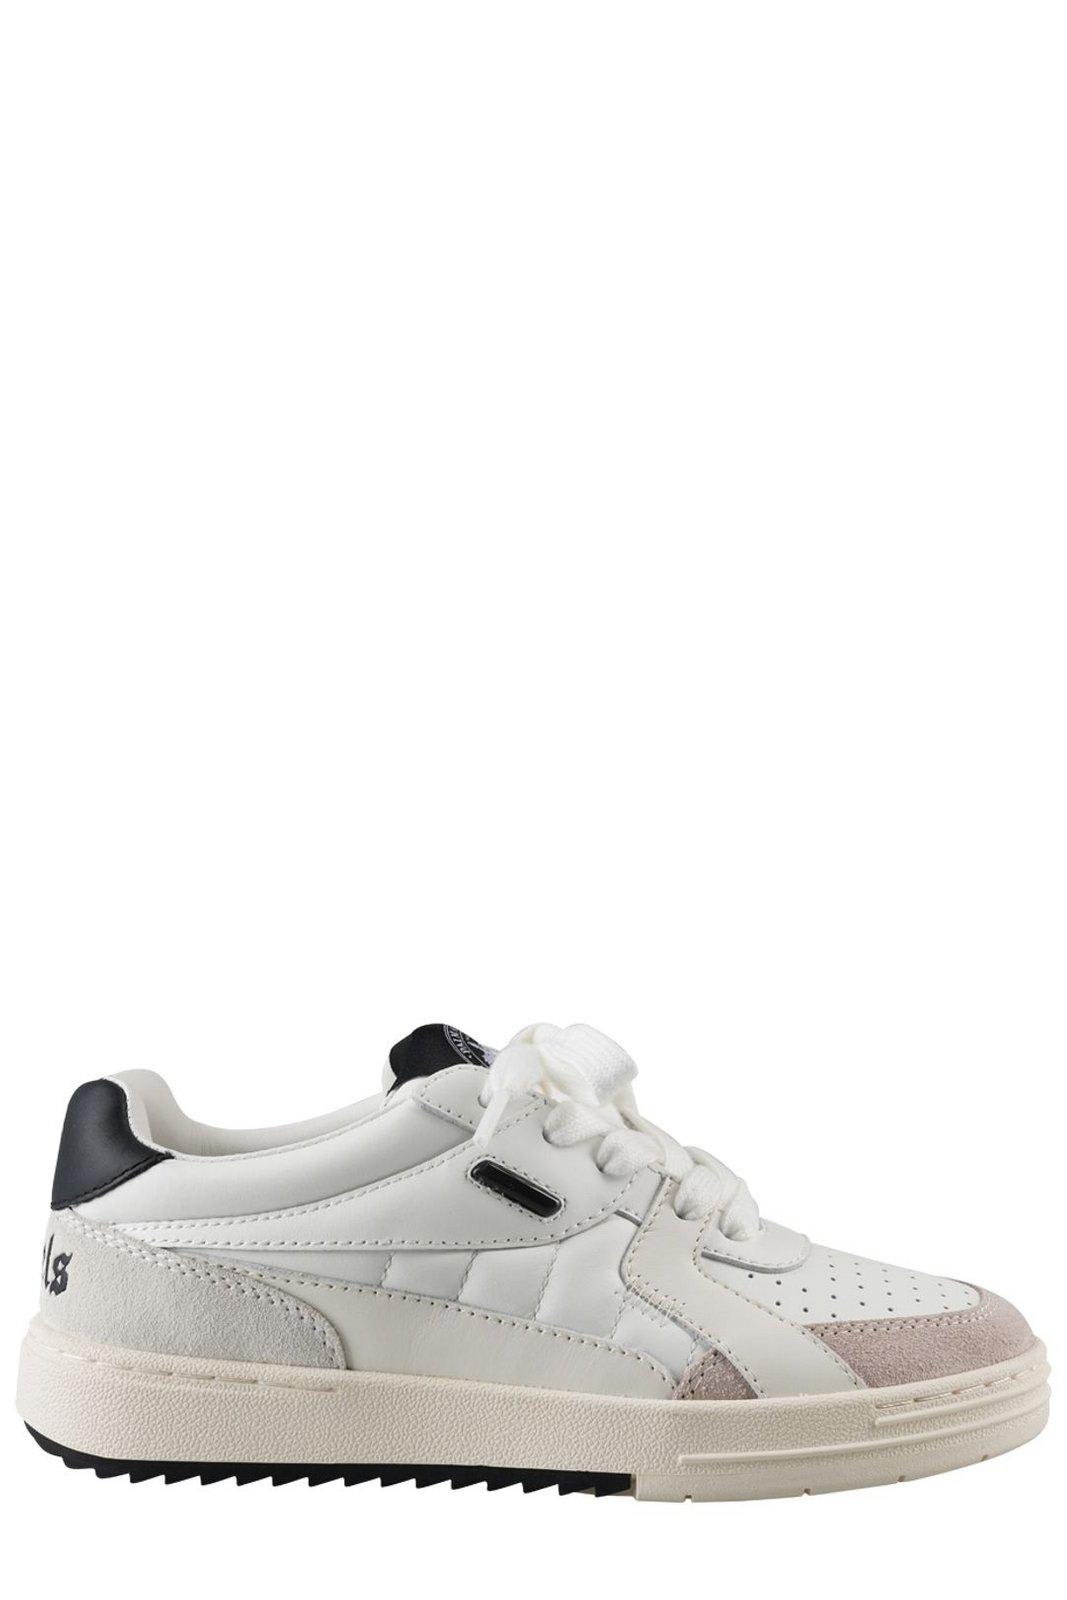 Palm Angels Palm University Lace-up Sneakers